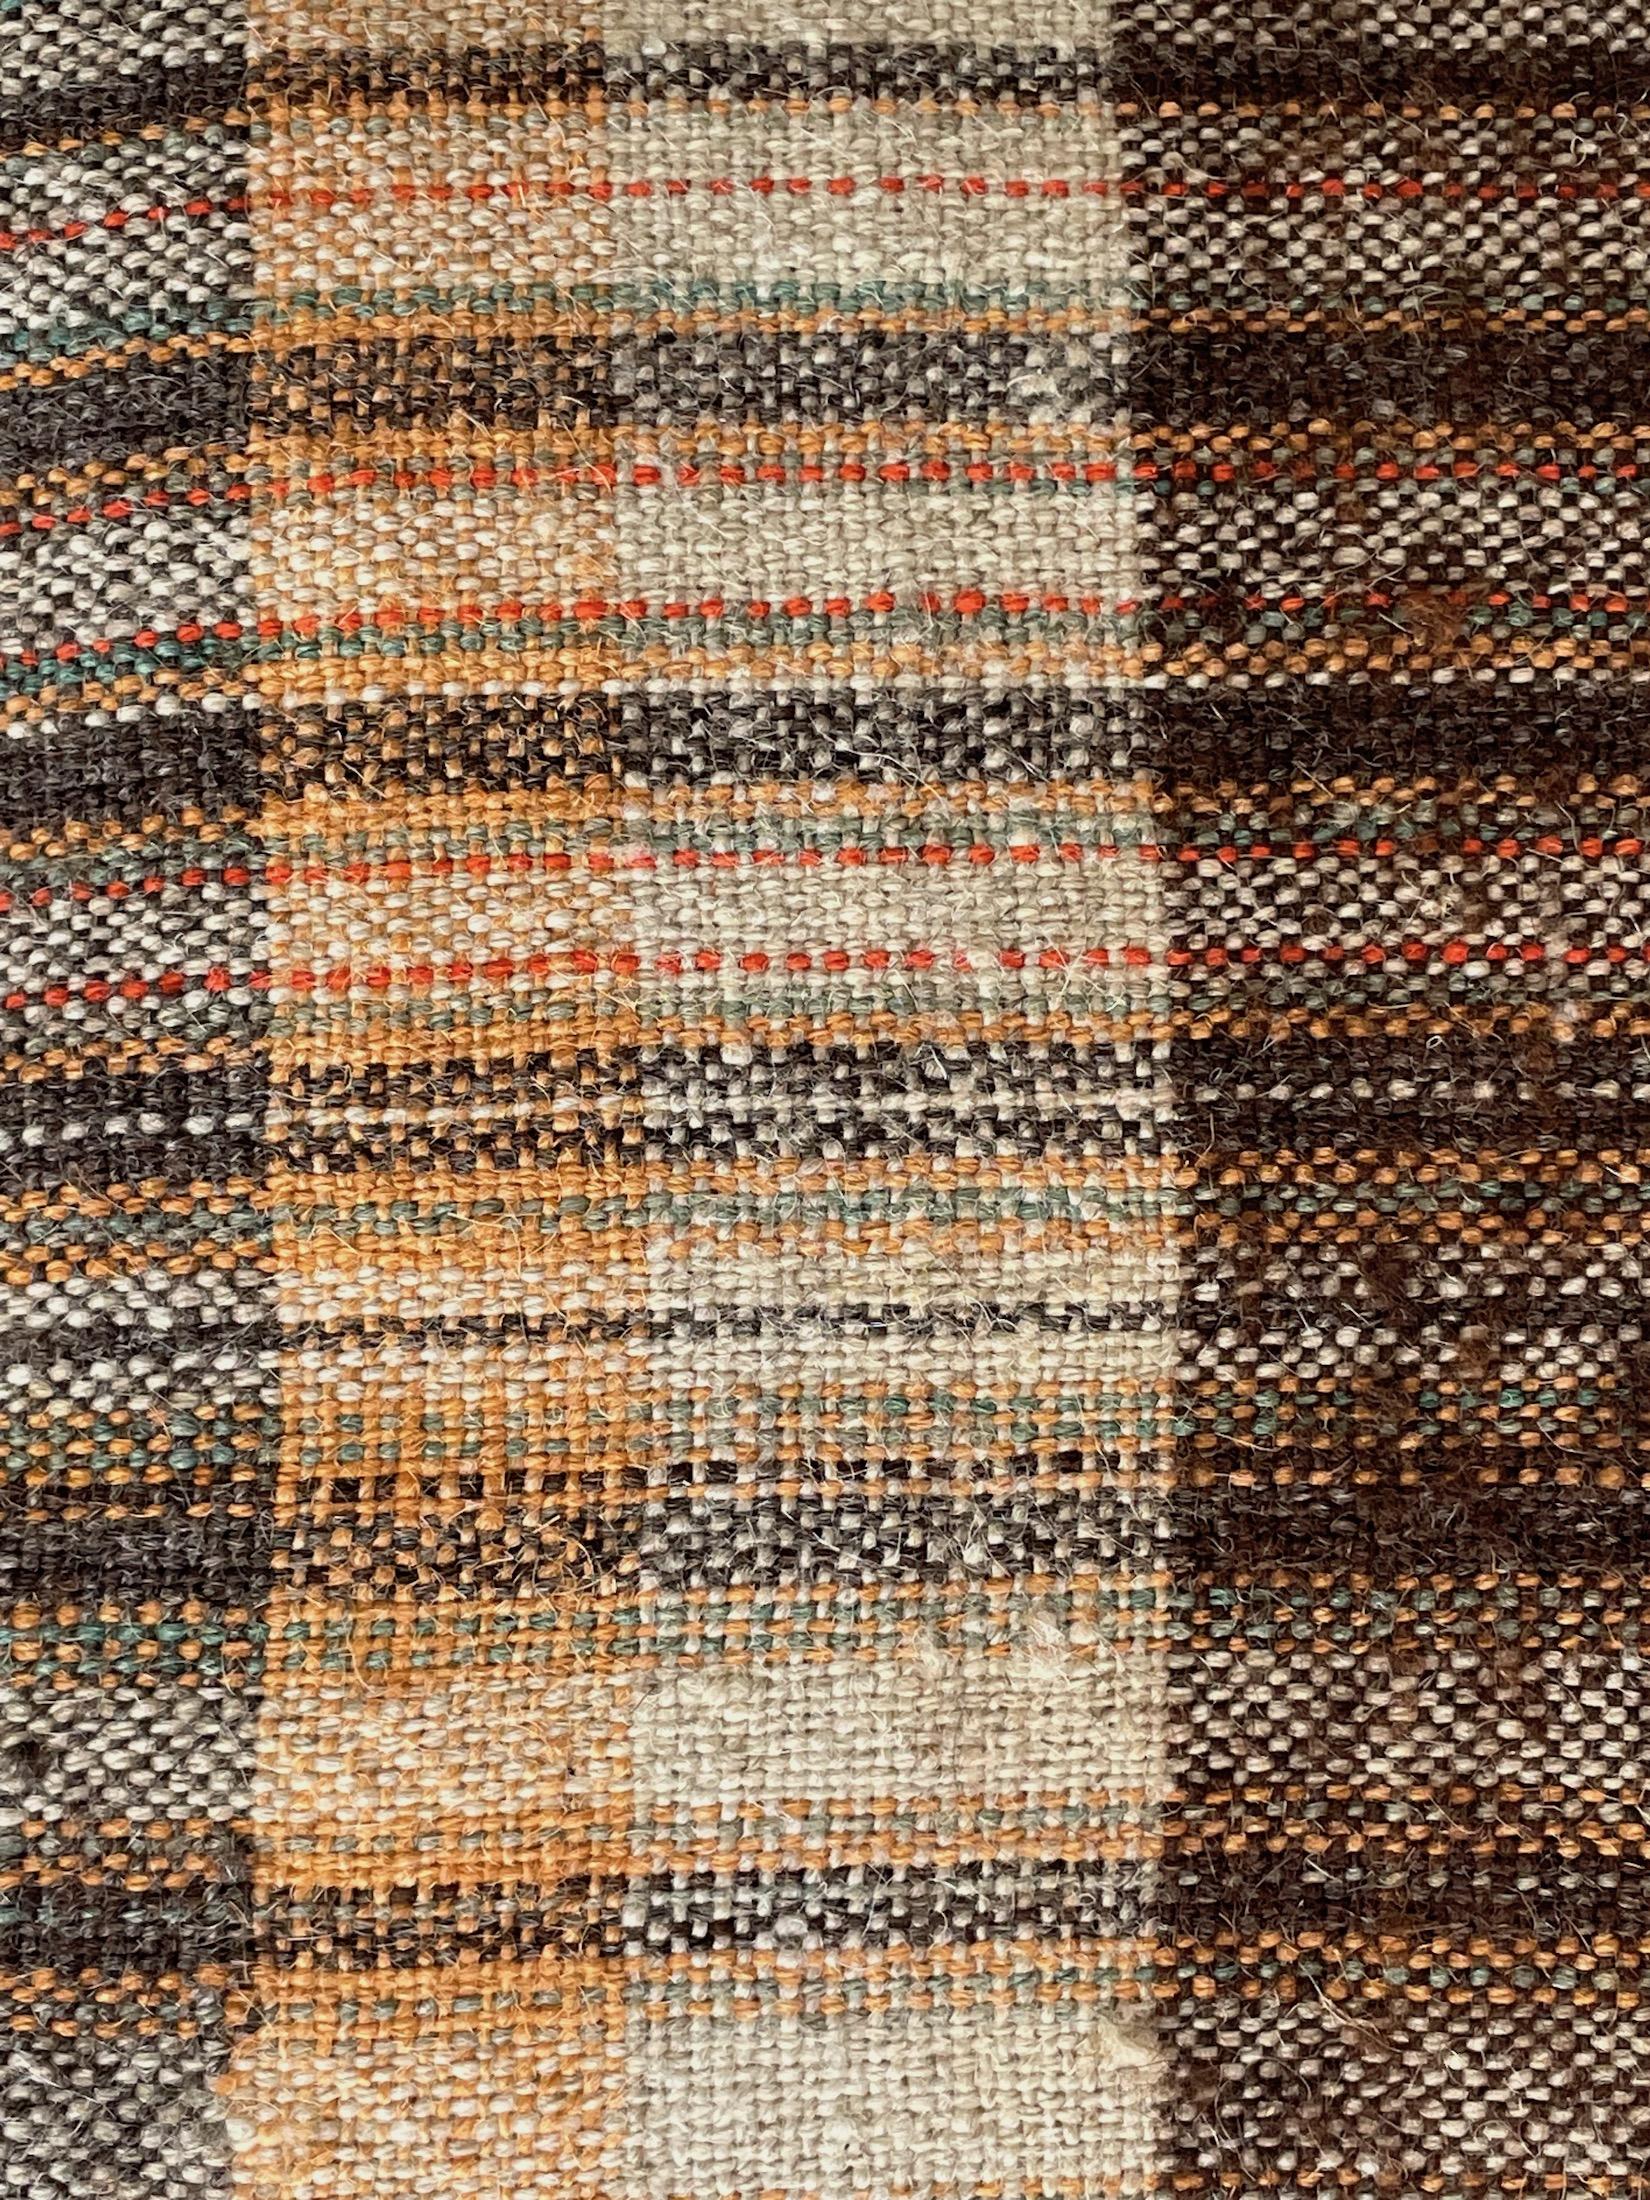 Midcentury Portuguese pillow made from handwoven fabric used originally as flour sacks.
New down and feather insert.
Brown, cream, dark orange and teal stripes.